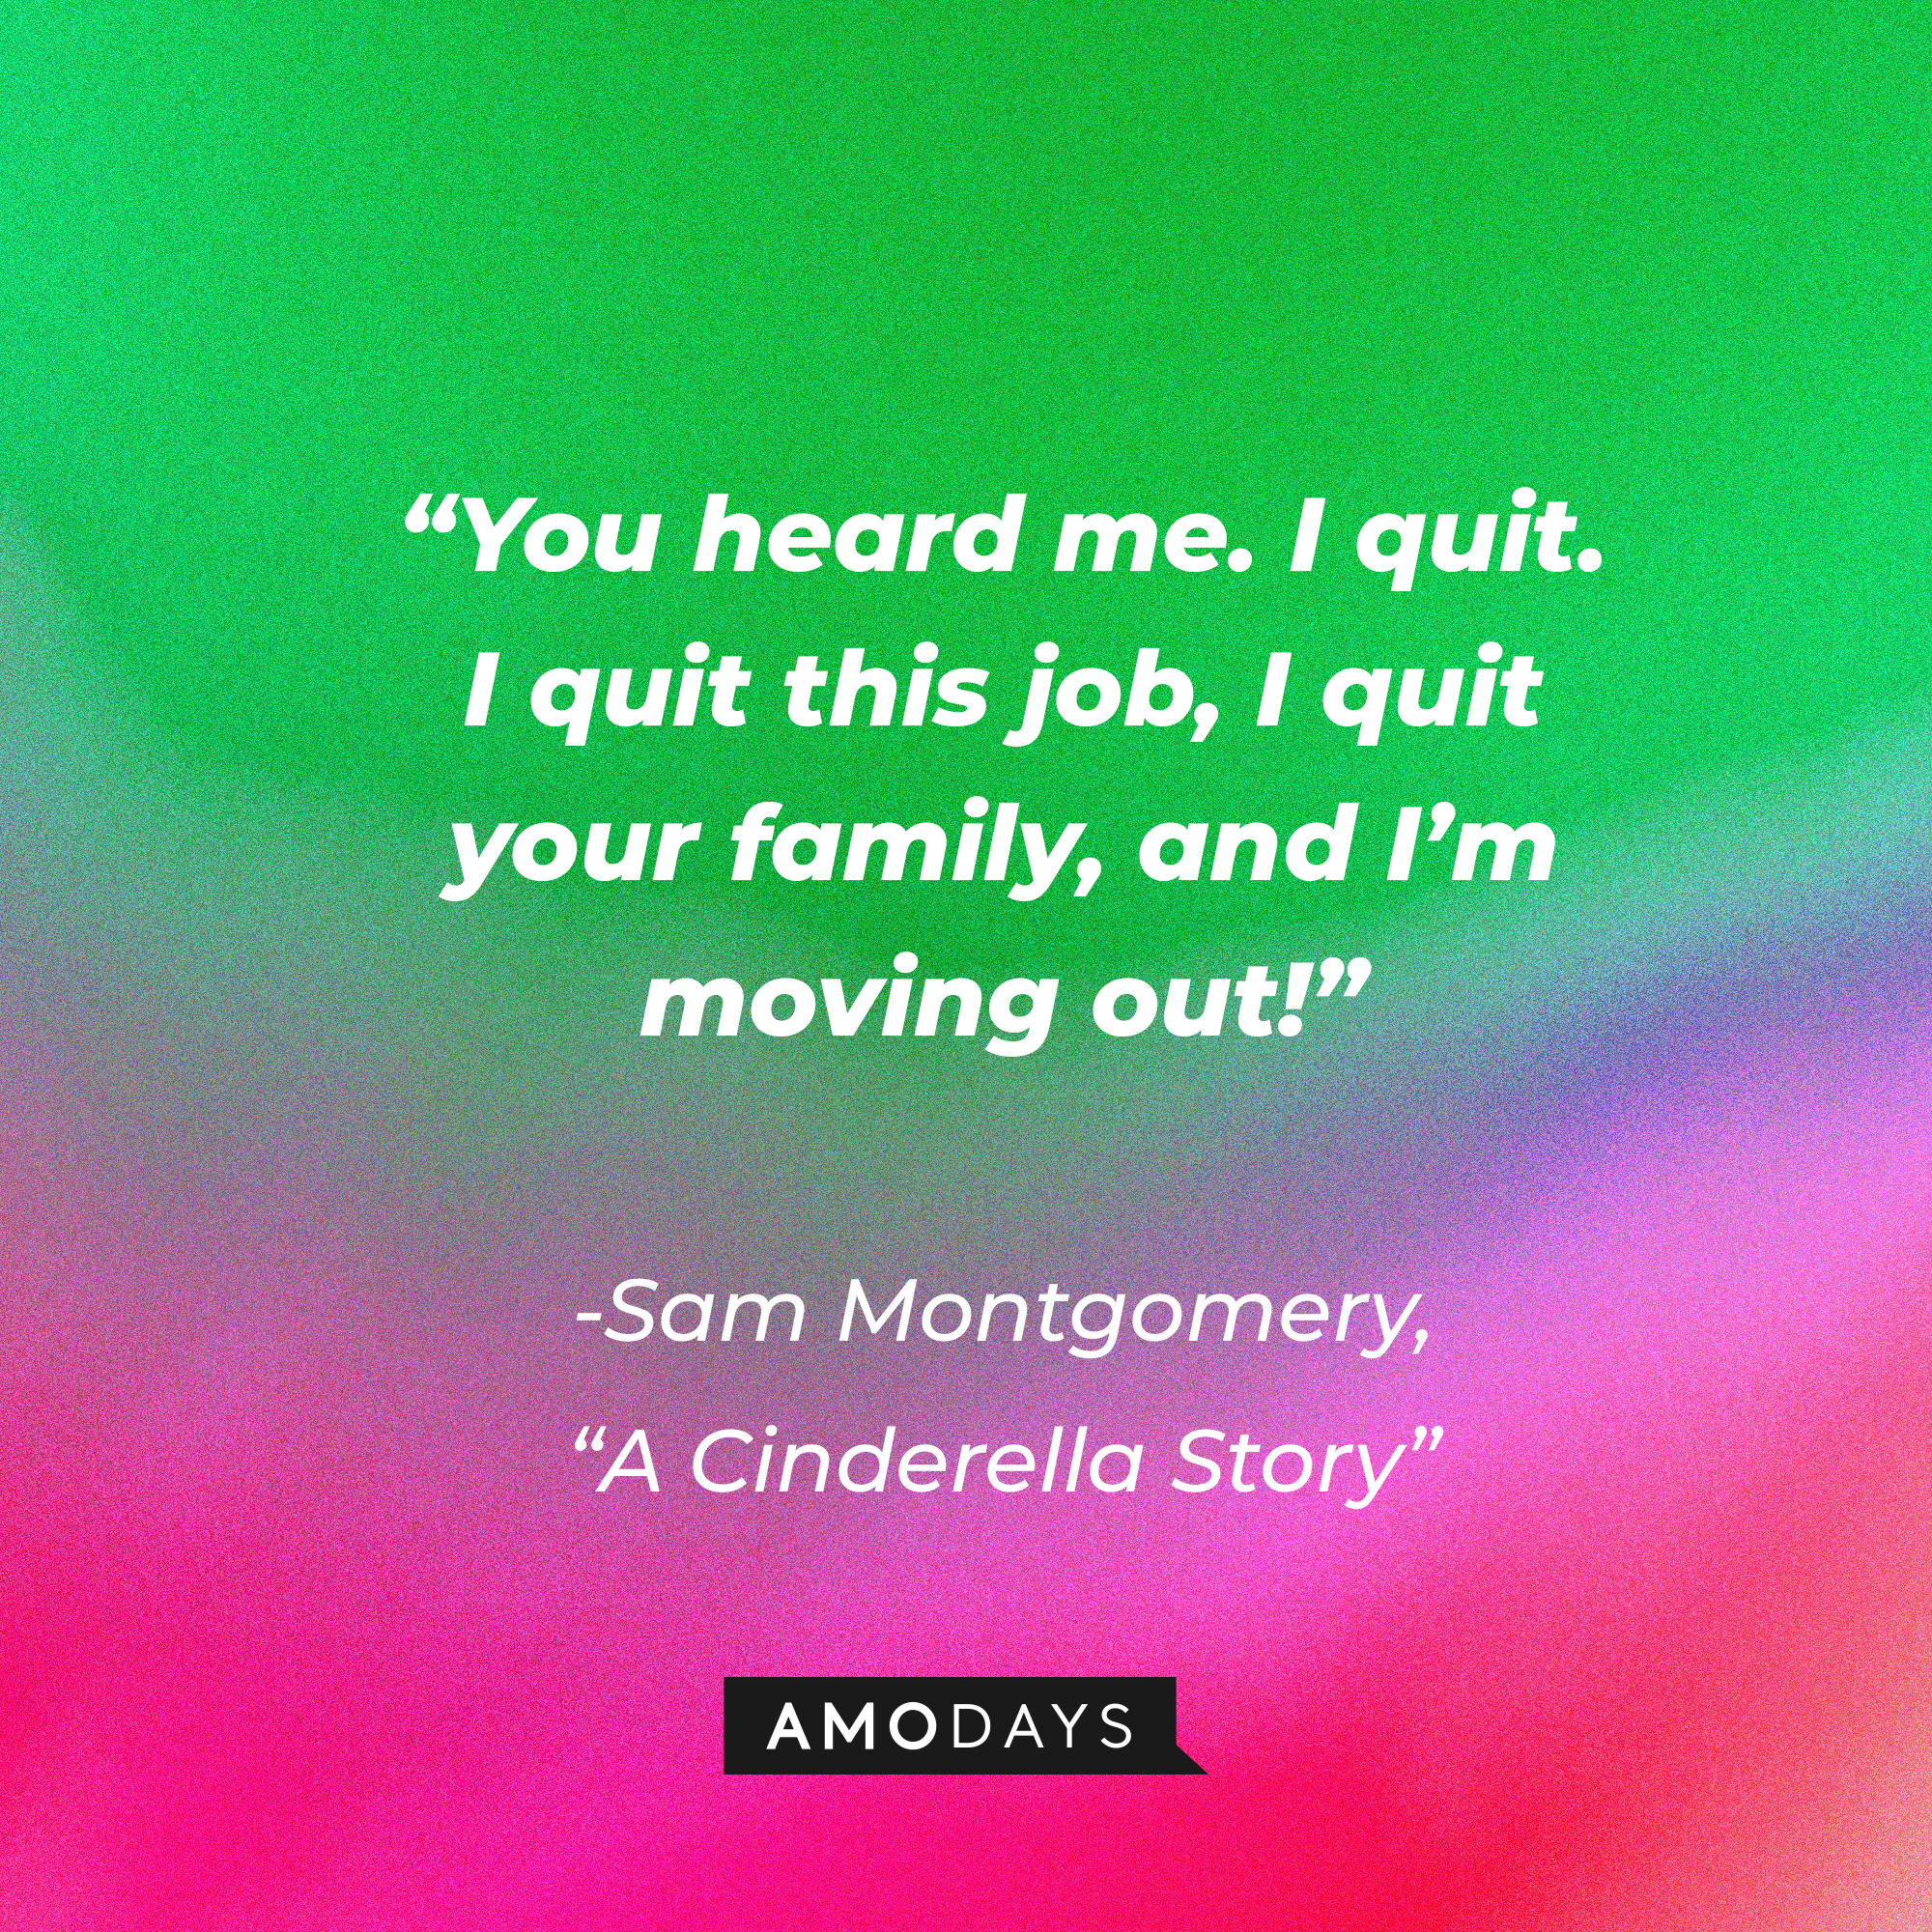 Sam Montgomery's quote from "A Cinderella Story:" “You heard me. I quit. I quit this job, I quit your family, and I’m moving out!” | Source: Youtube.com/warnerbrosentertainment